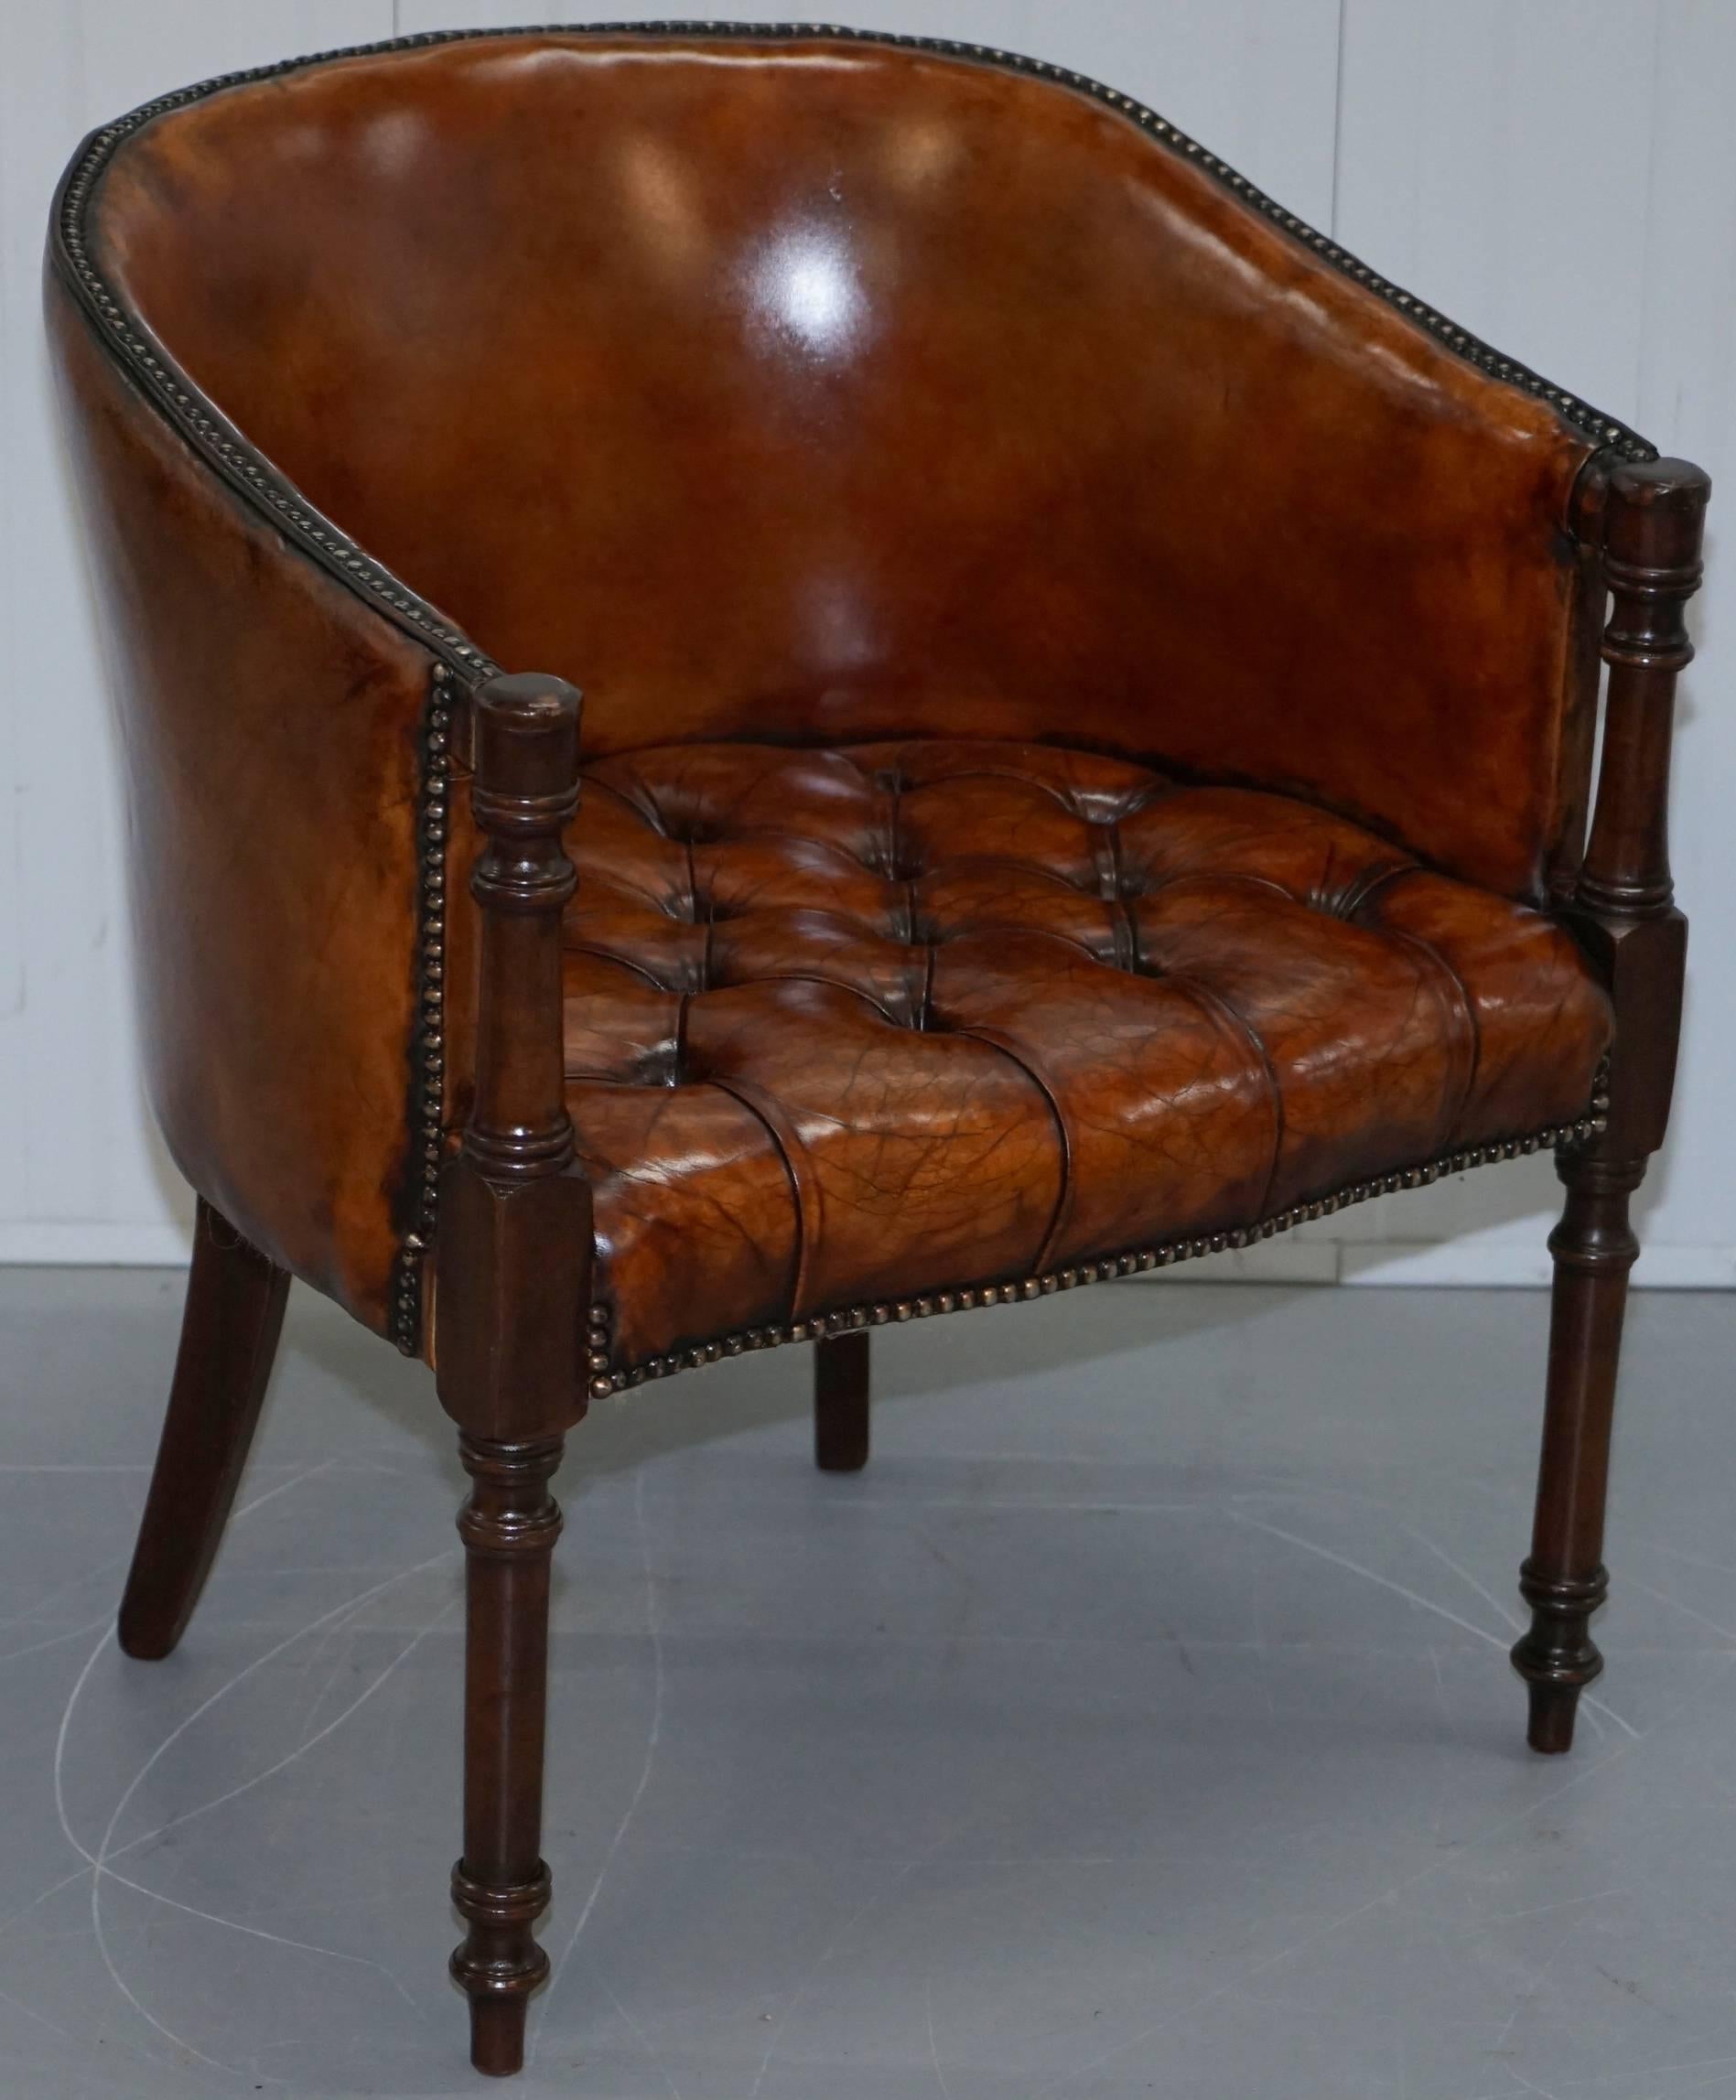 We are delighted to offer for sale this pair of Regency styled, circa 1910 fully restored hand dyed premium russet leather Chesterfield club tub armchairs

Please note the delivery fee is just a guide, for an accurate quote please send me your